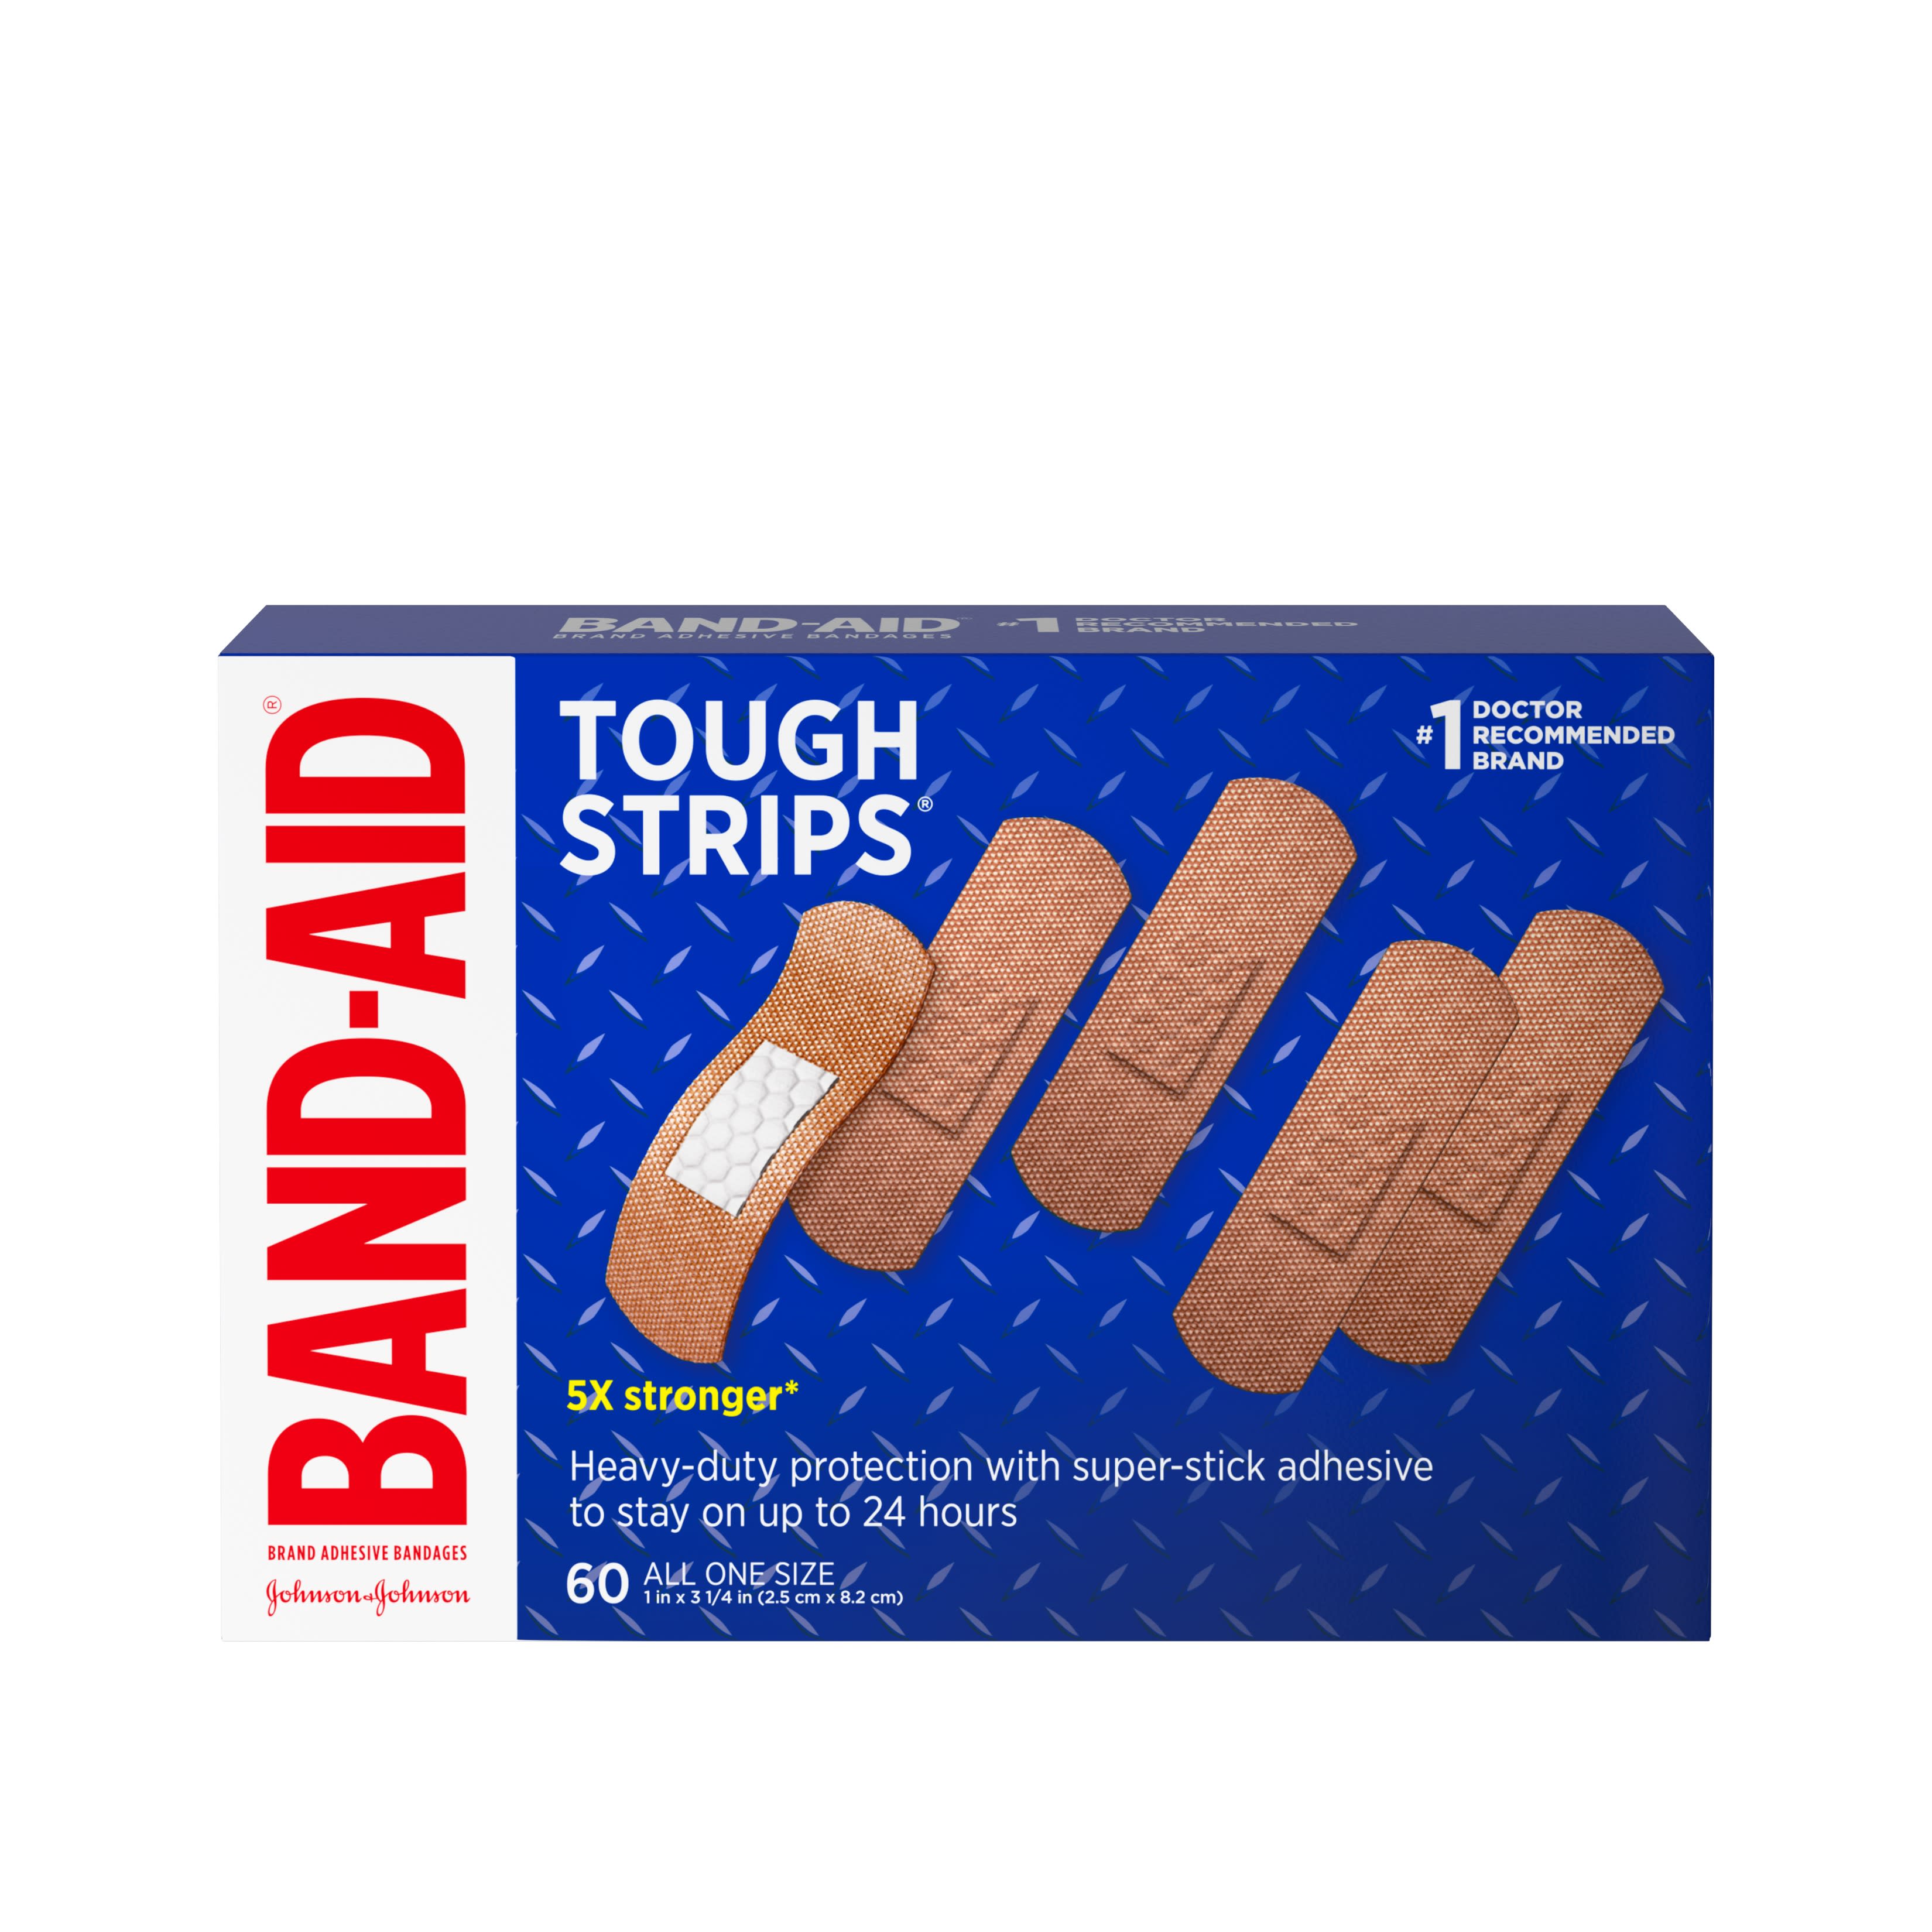  Band Aid Brand Tough Strips Adhesive Bandage All One Size 60 Ct 